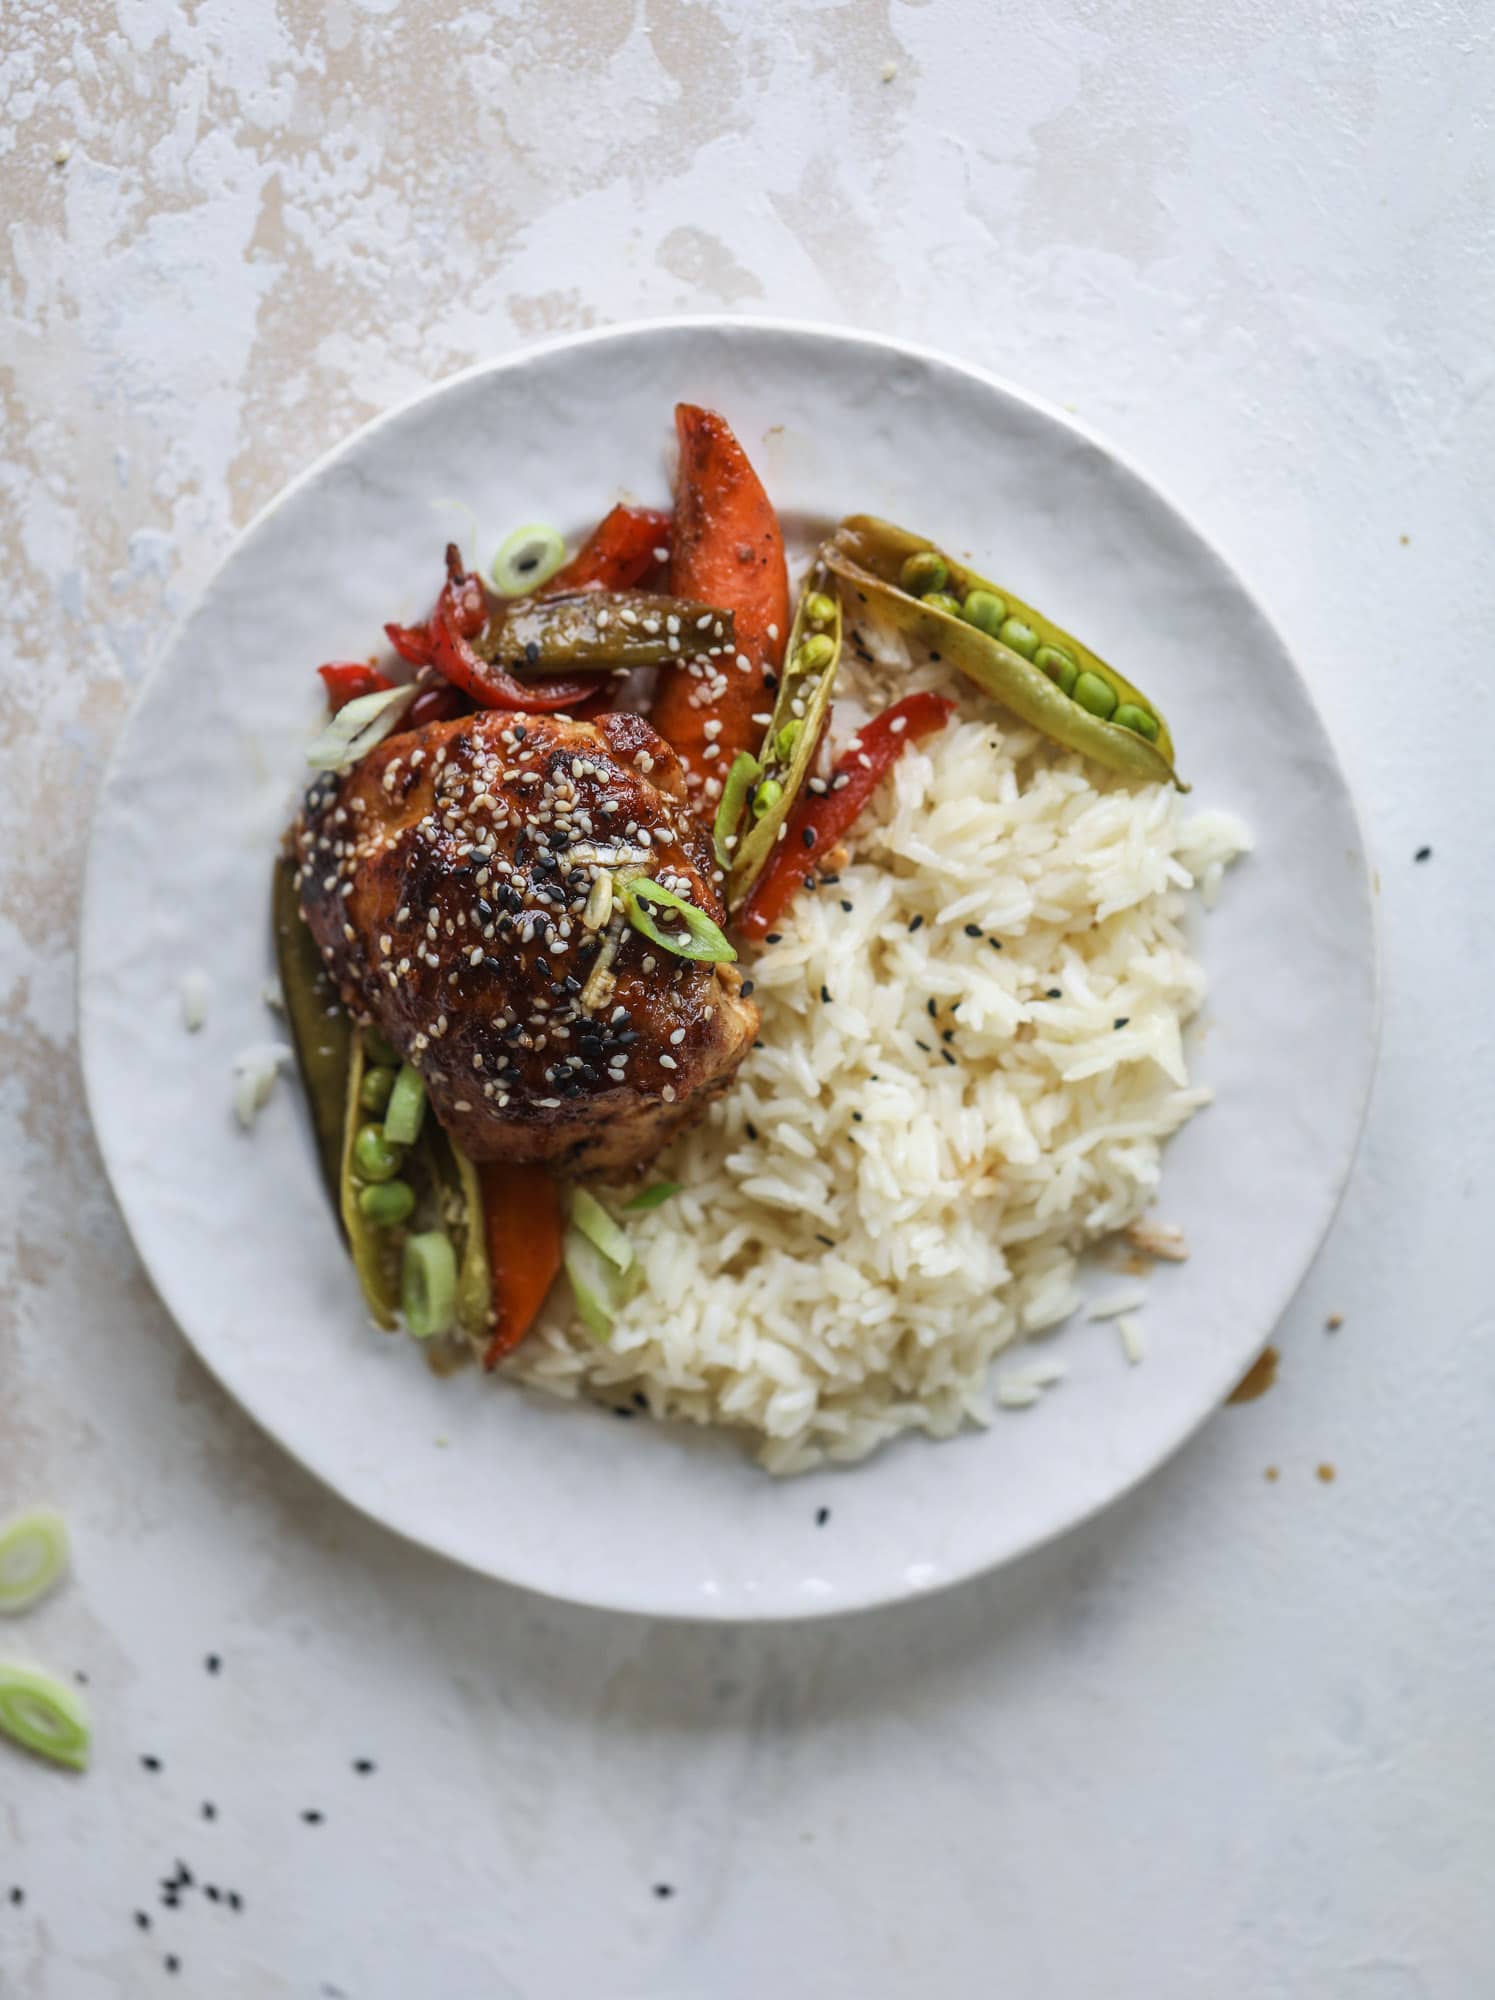 This one pan sesame chicken and veggies is so easy and delicious! It's the perfect weeknight meal that is packed with flavor. The chicken and veggies are great on their own but also wonderful when paired with brown rice or quinoa! I howsweeteats.com #one #pan #sesame #chicken #dinner #easy